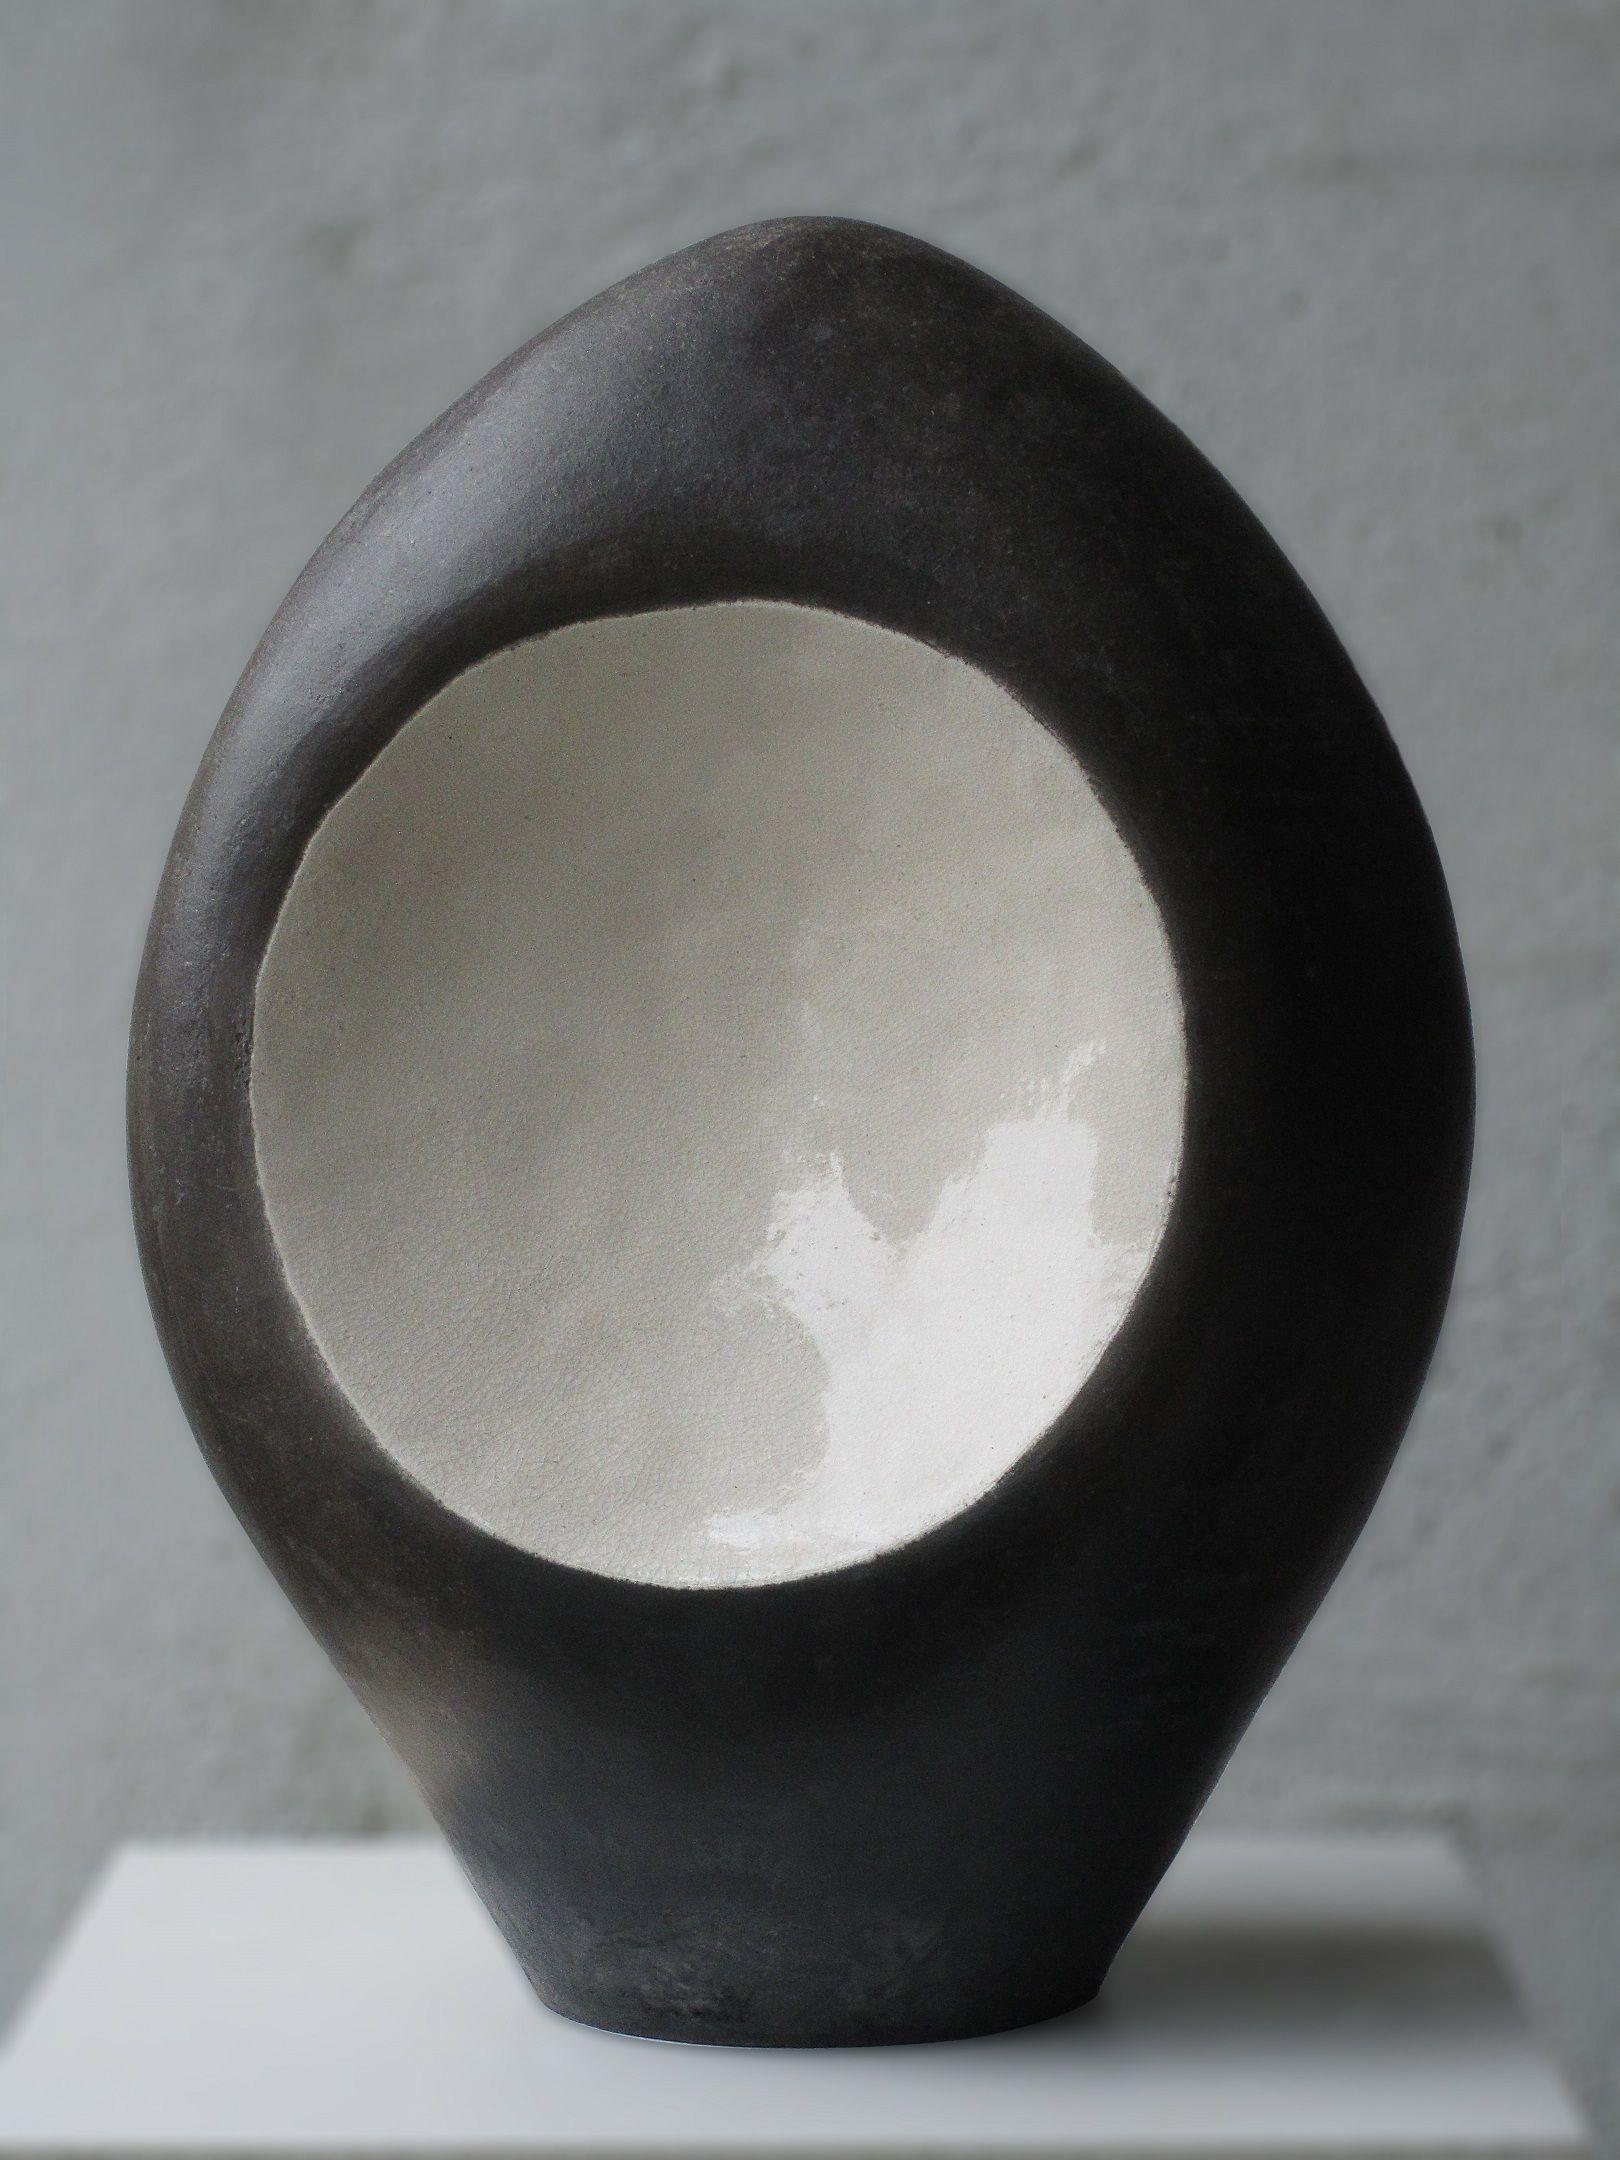 Cell is a unique ceramic sculpture by contemporary artist Tien Wen, dimensions are 33 × 26 × 17 cm (13 × 10.2 × 6.7 in). 
The sculpture is signed and comes with a certificate of authenticity. 

This abstract and minimalist artwork first appeals by